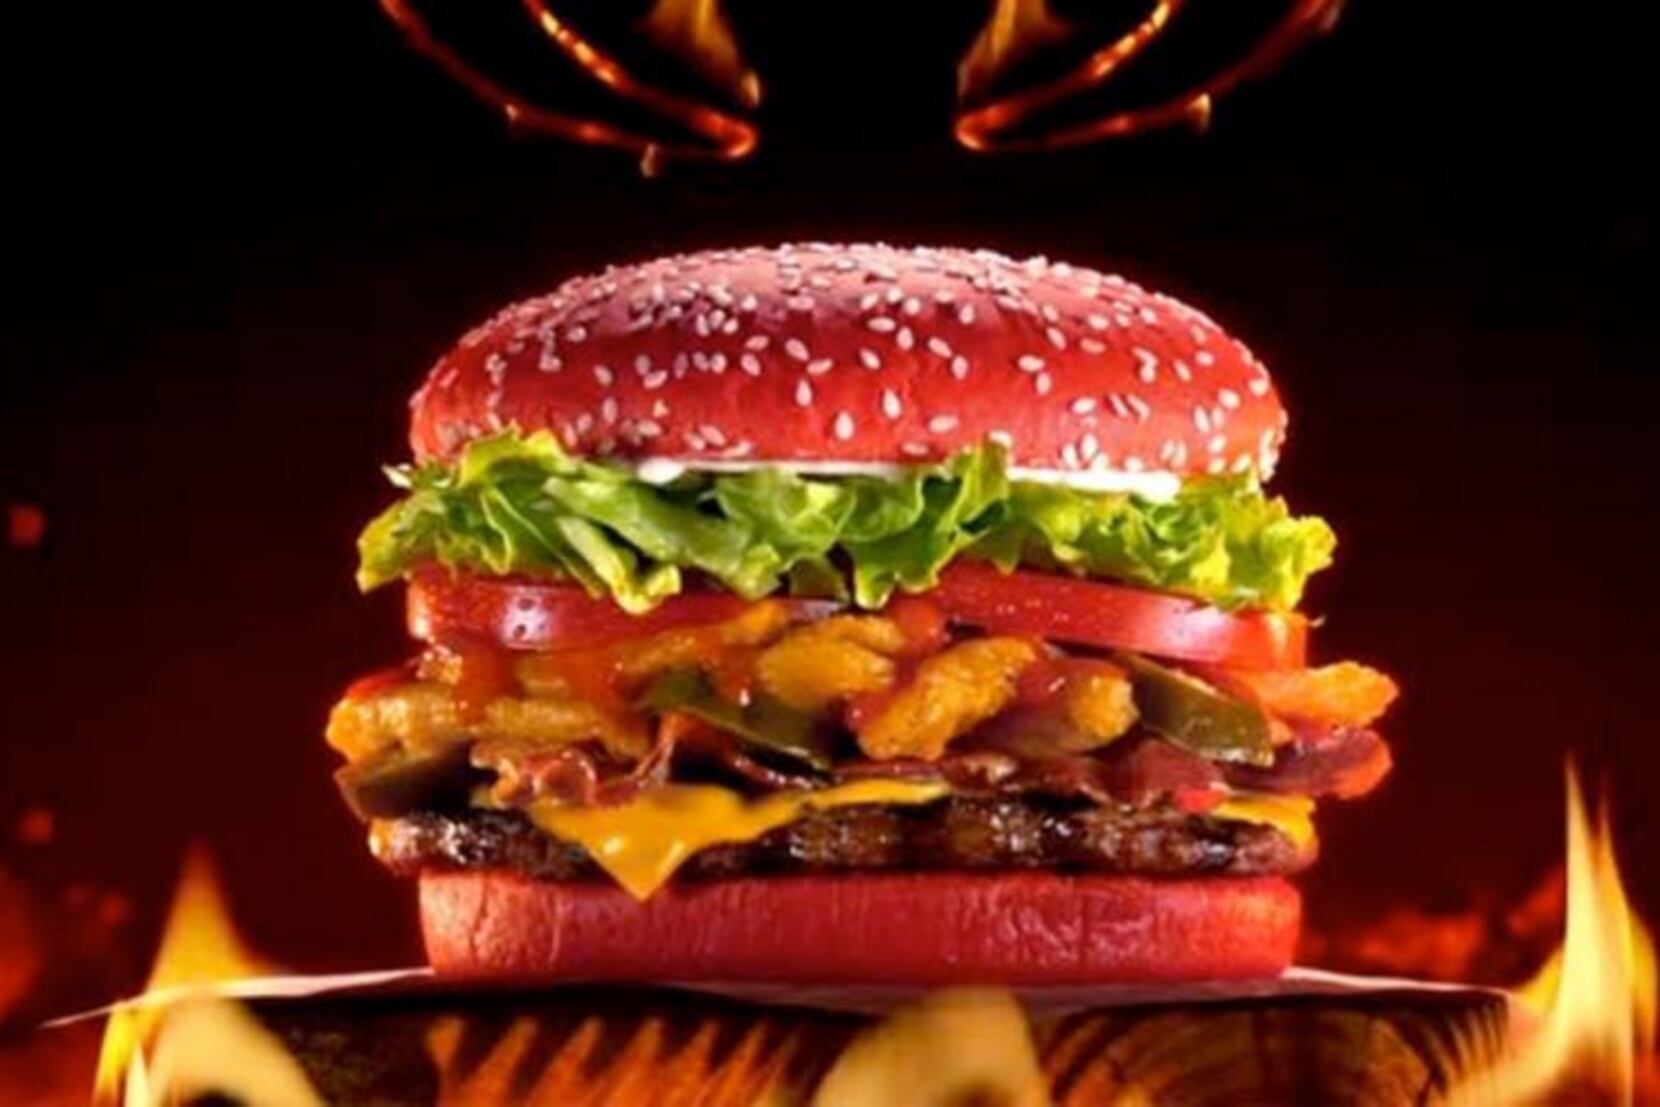 GreenPoop: Burger King's Halloween Whopper comes with an